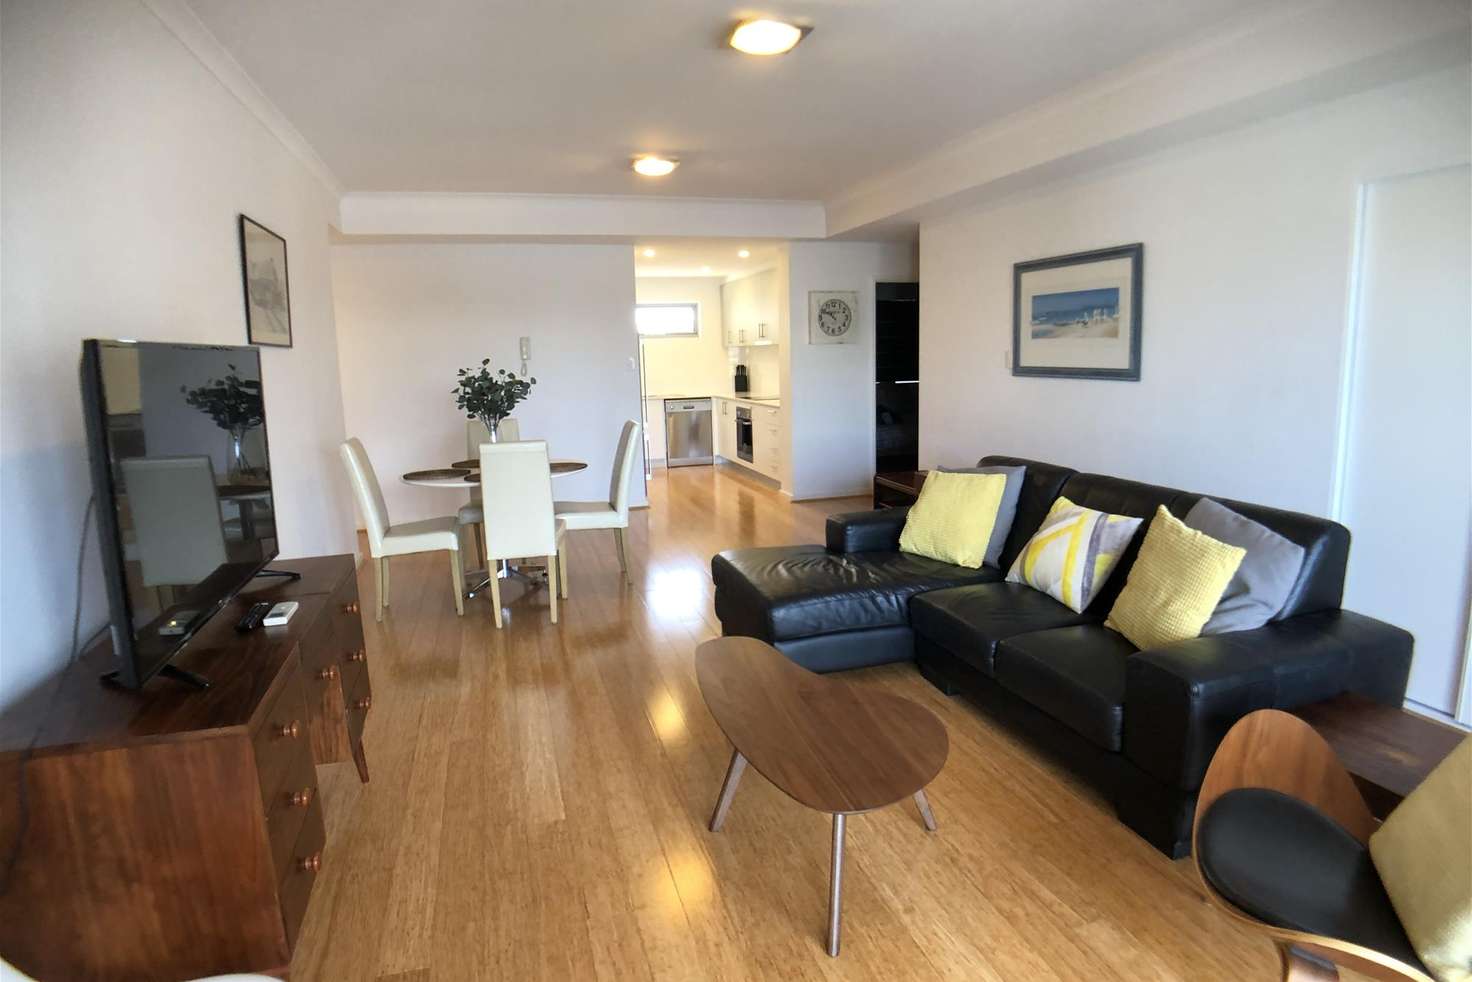 Main view of Homely apartment listing, 15/211 Beaufort St, Perth WA 6000